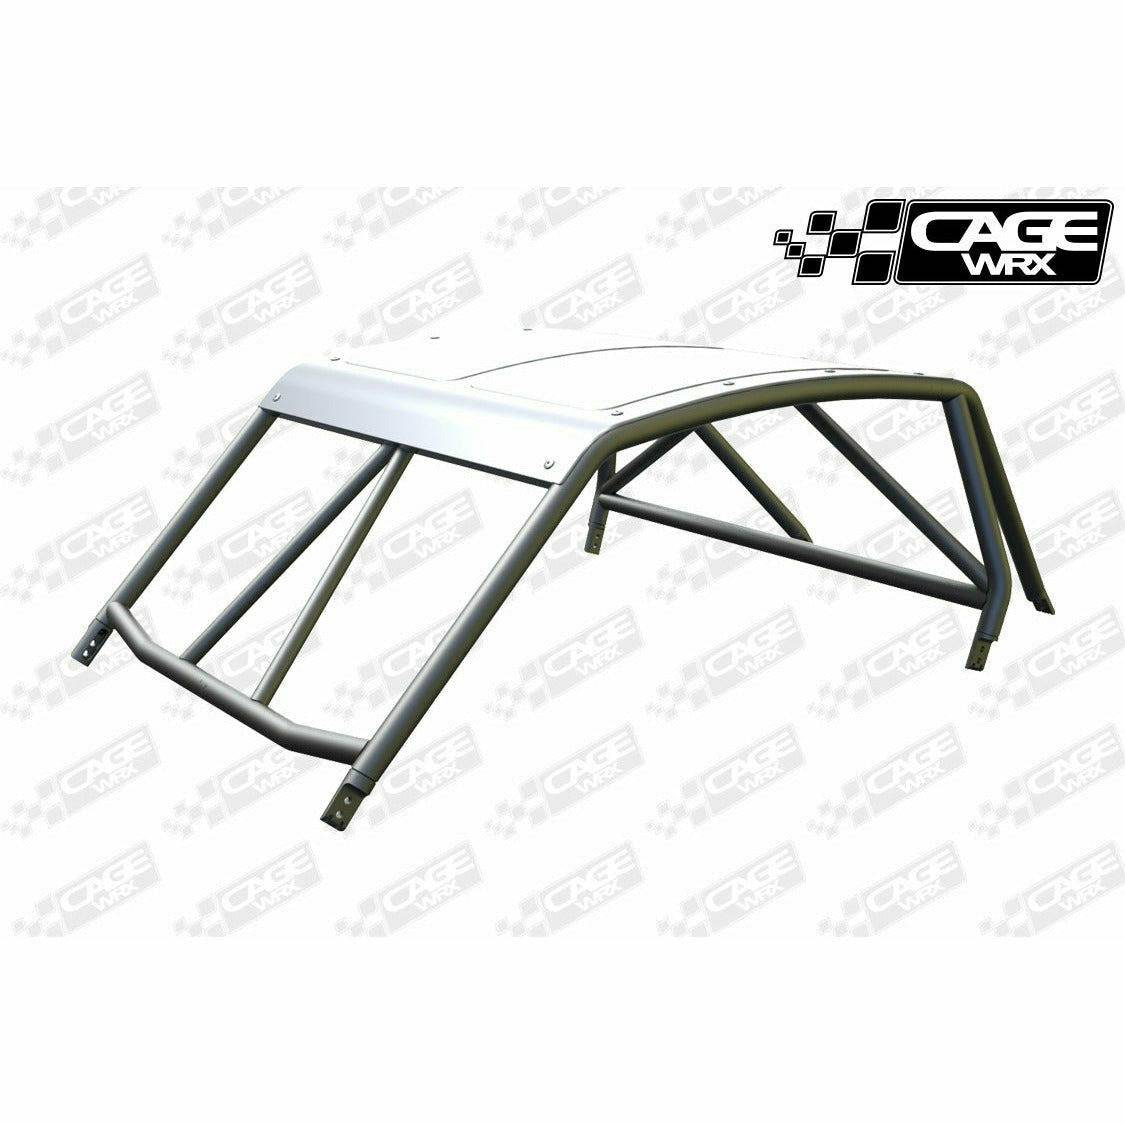 Polaris RZR (2019+) Raw Assembled Competition Cage with Roof - Kombustion Motorsports